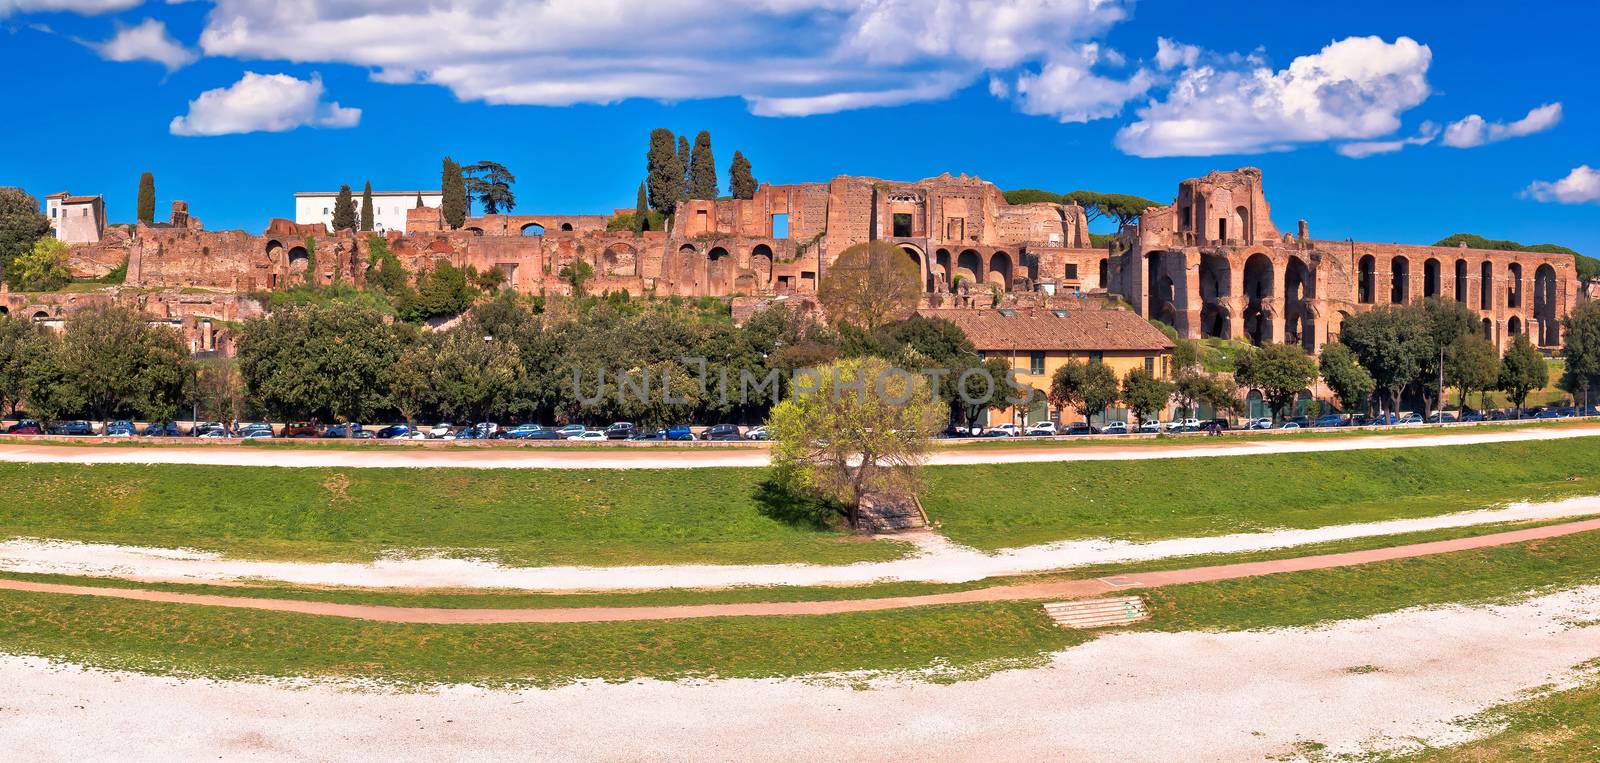 The Circus Maximus and ancient Rome landmarks panoramic view, Eternal city, Italy